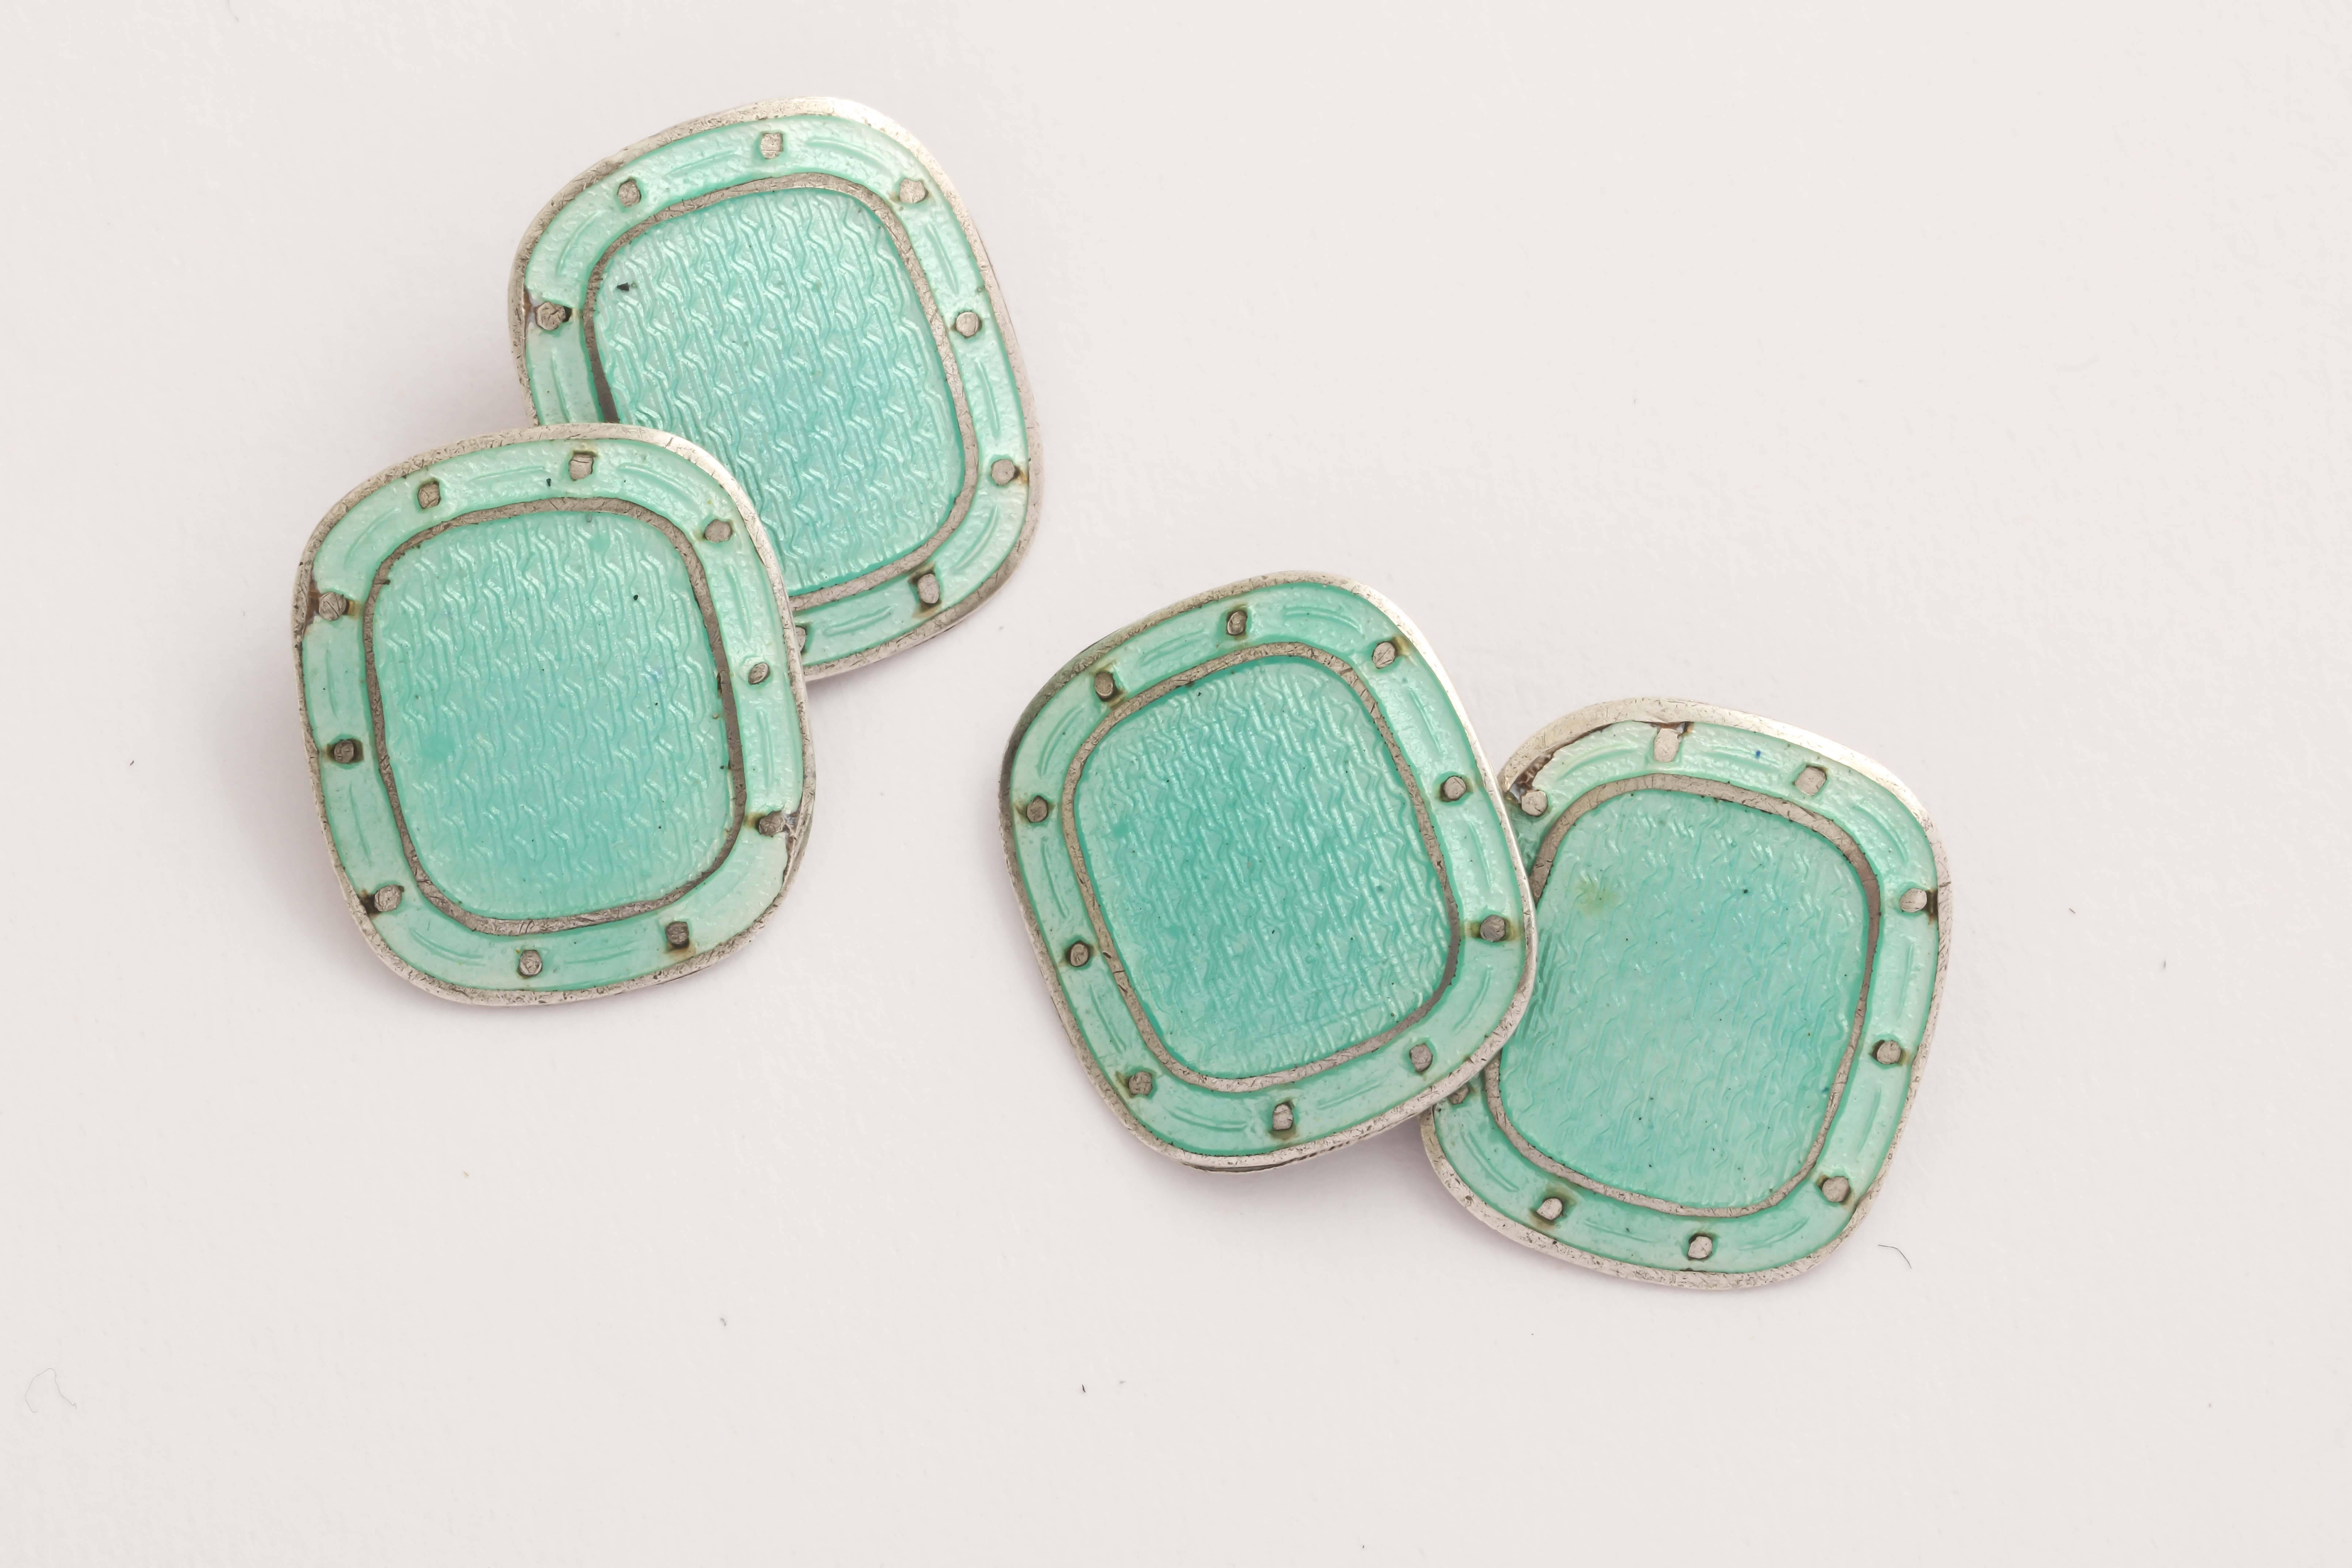 Rounded rectangular aqua with border of silver dots.
Impressed STERLING.
